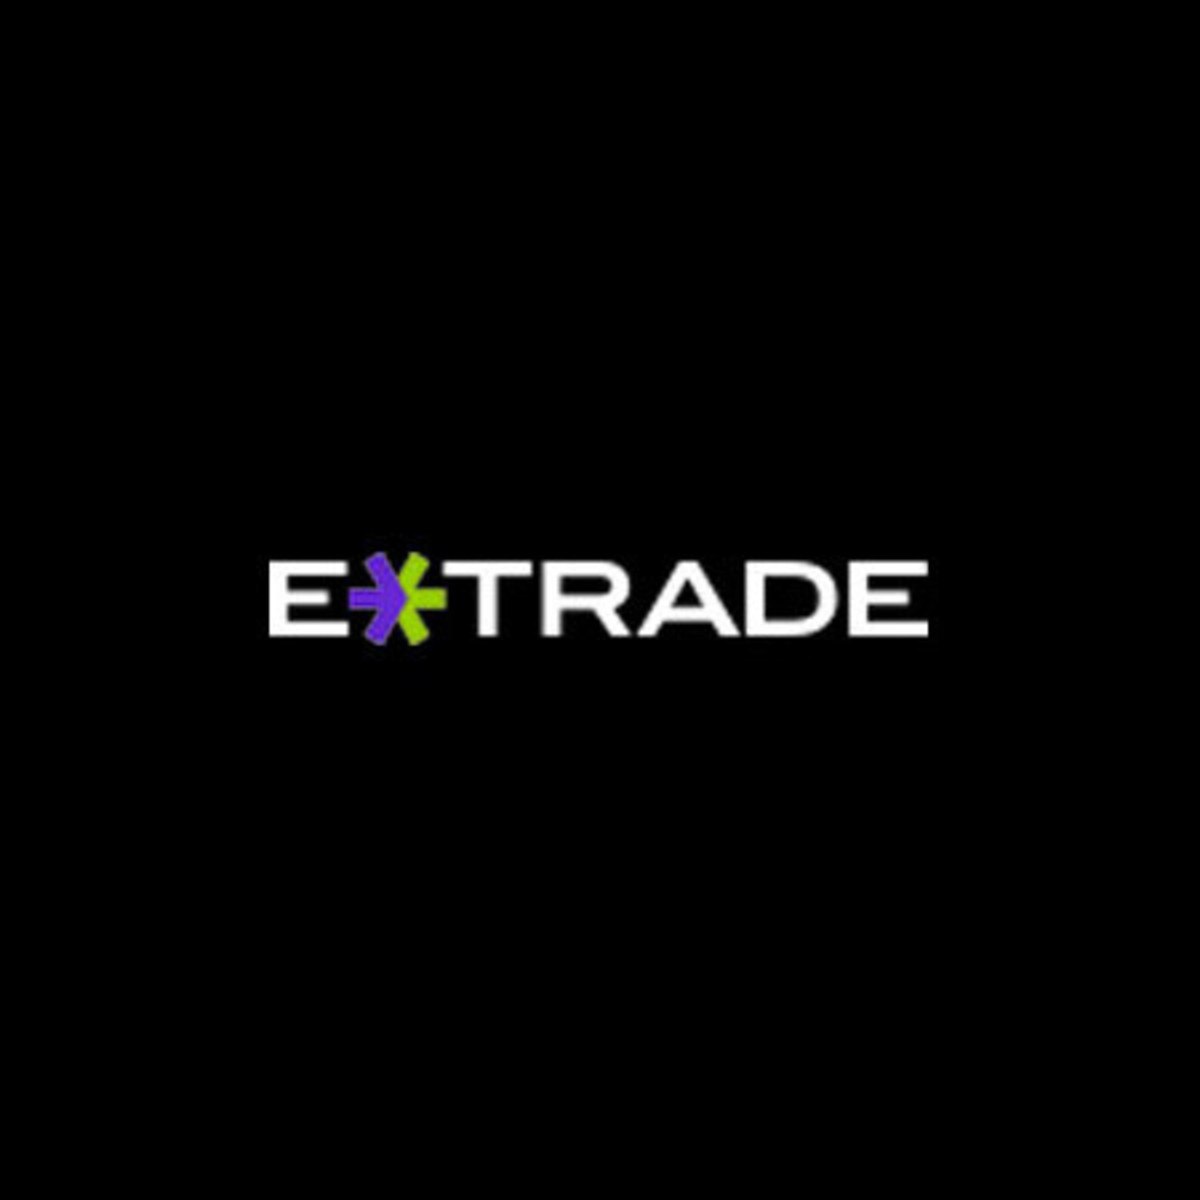 In 1982, the electronic trading platform E-Trade was founded.